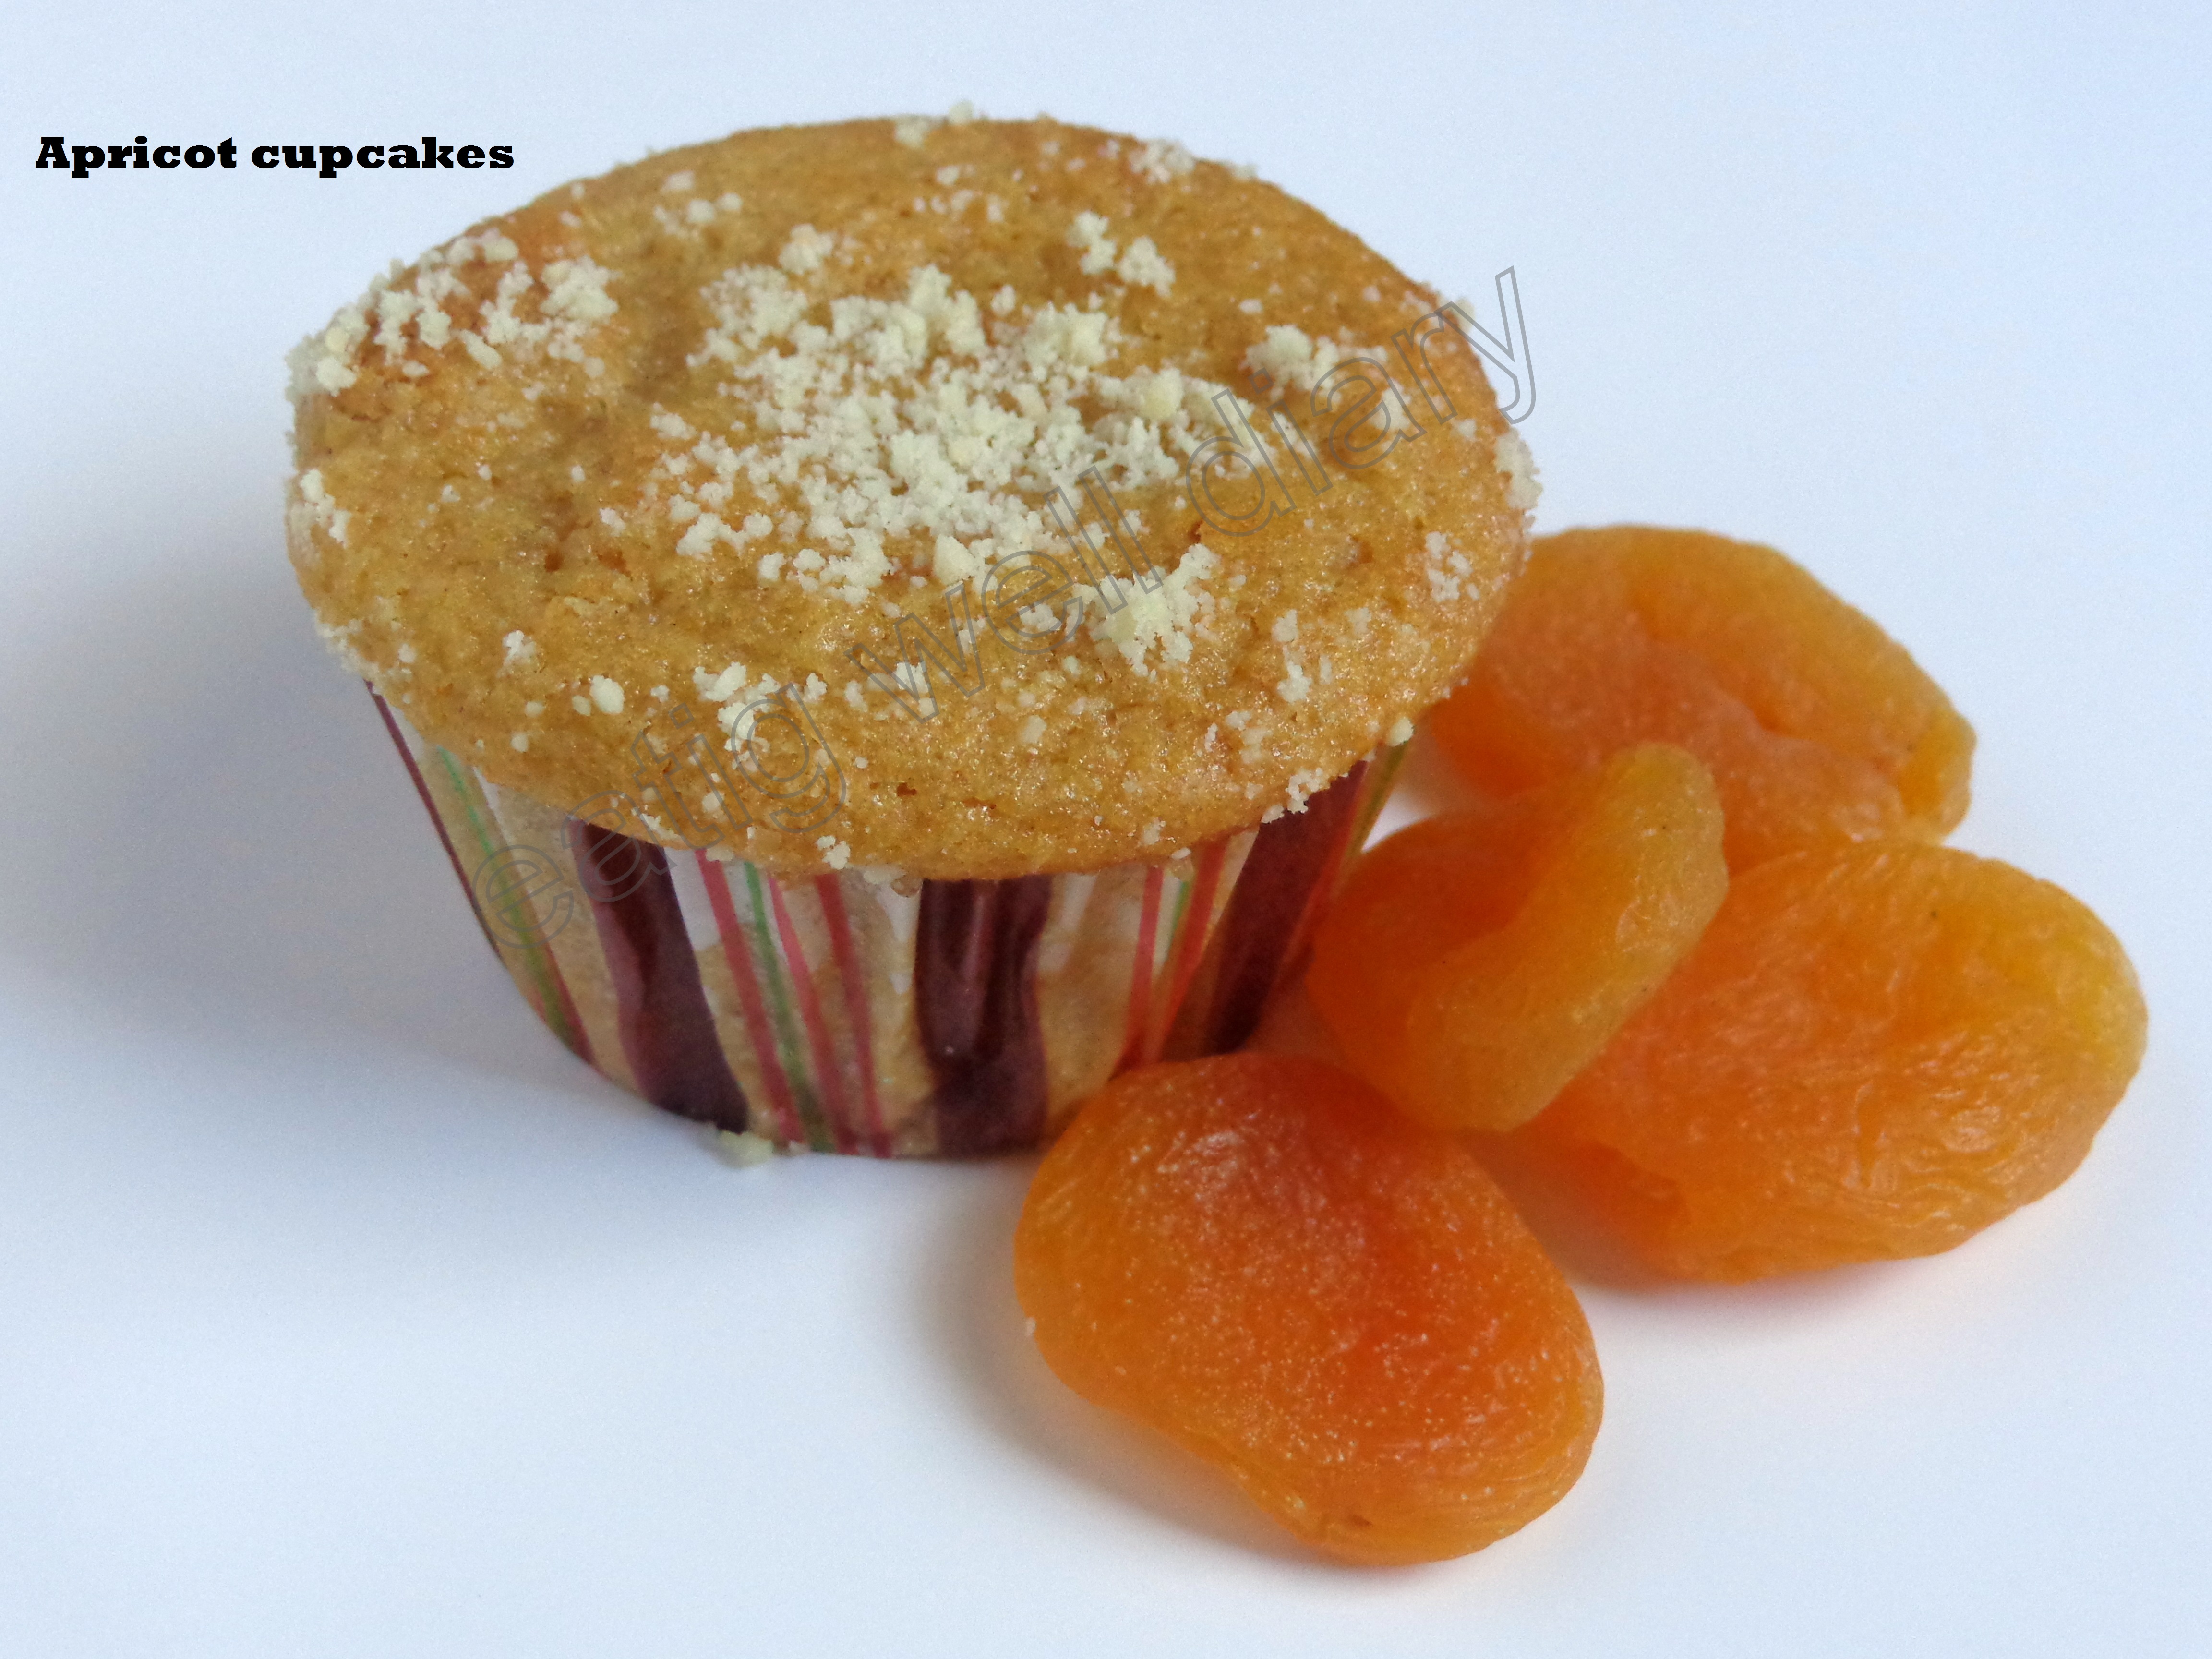 Eggless and sugarless whole wheat apricot cupcakes/muffins